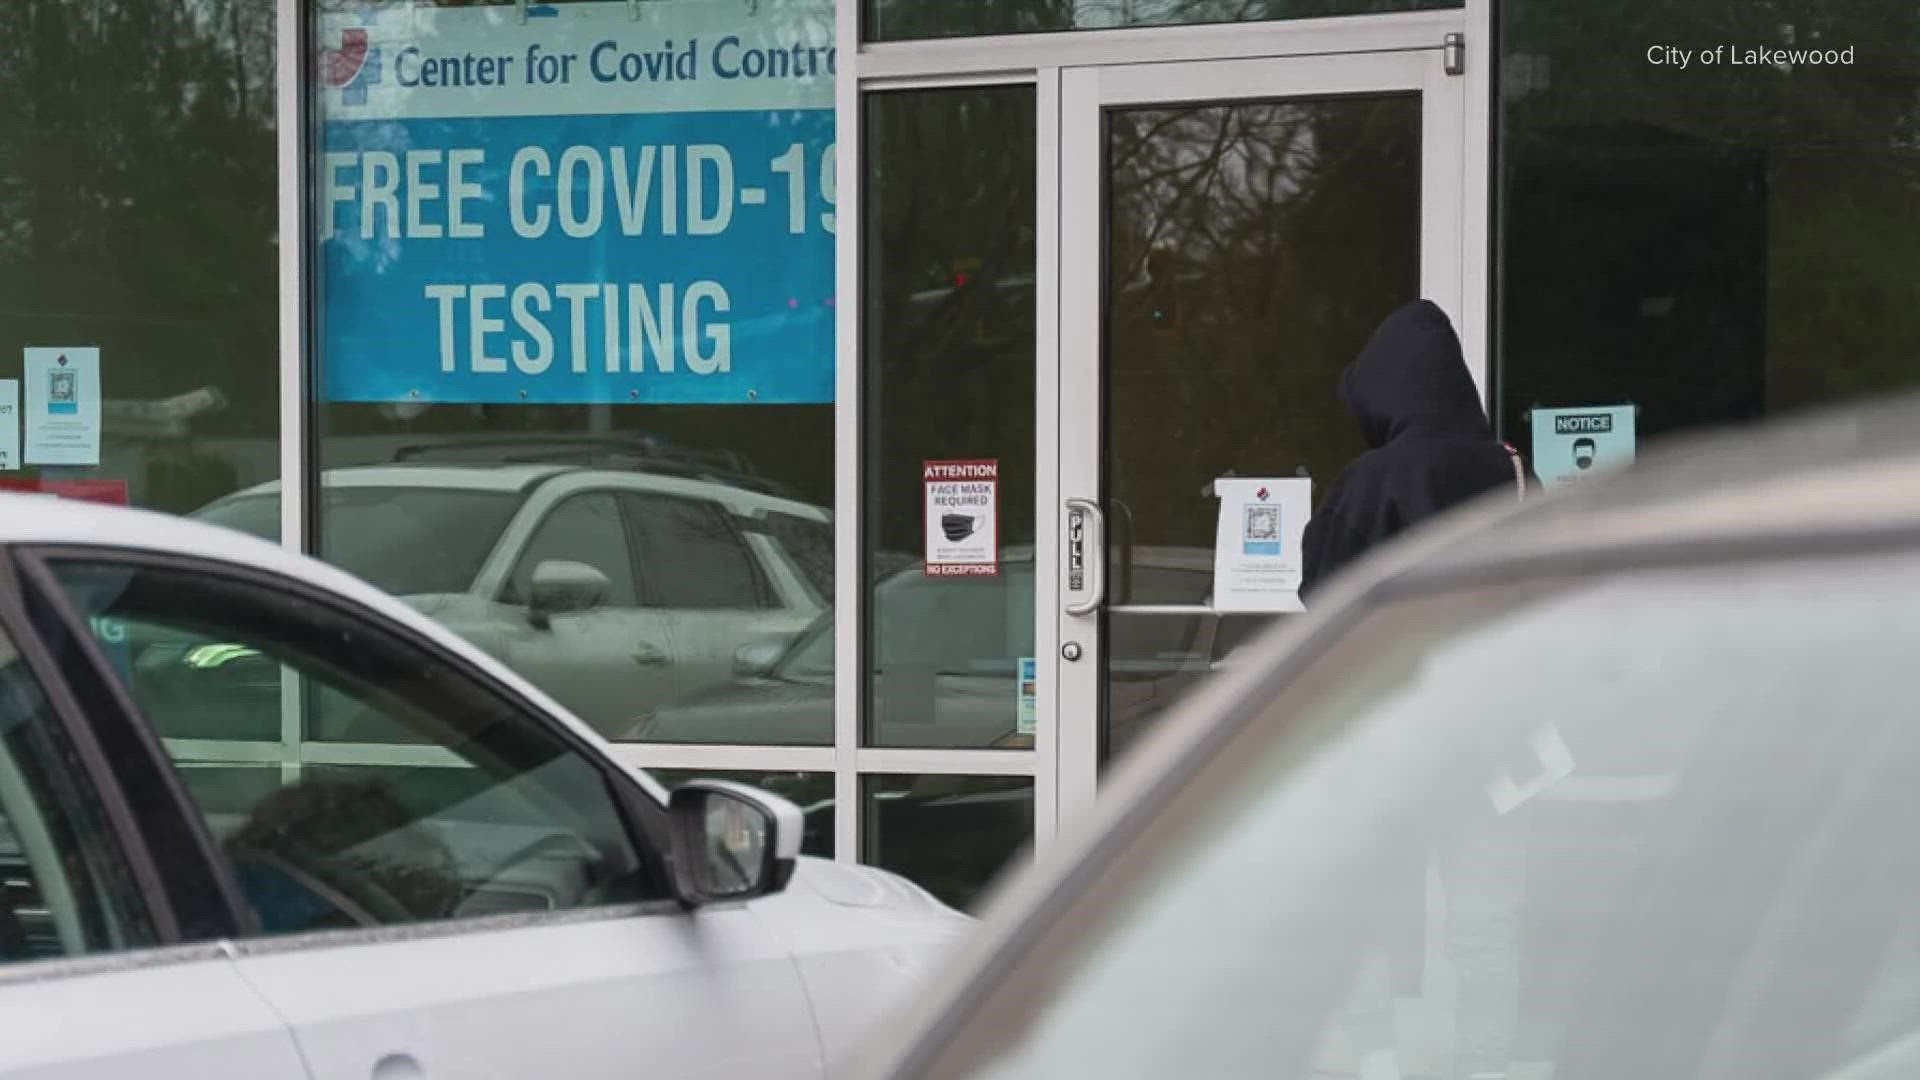 The Center for Covid Control operates at least 10 testing sites in Washington. Visitors question whether the sites are legitimate.